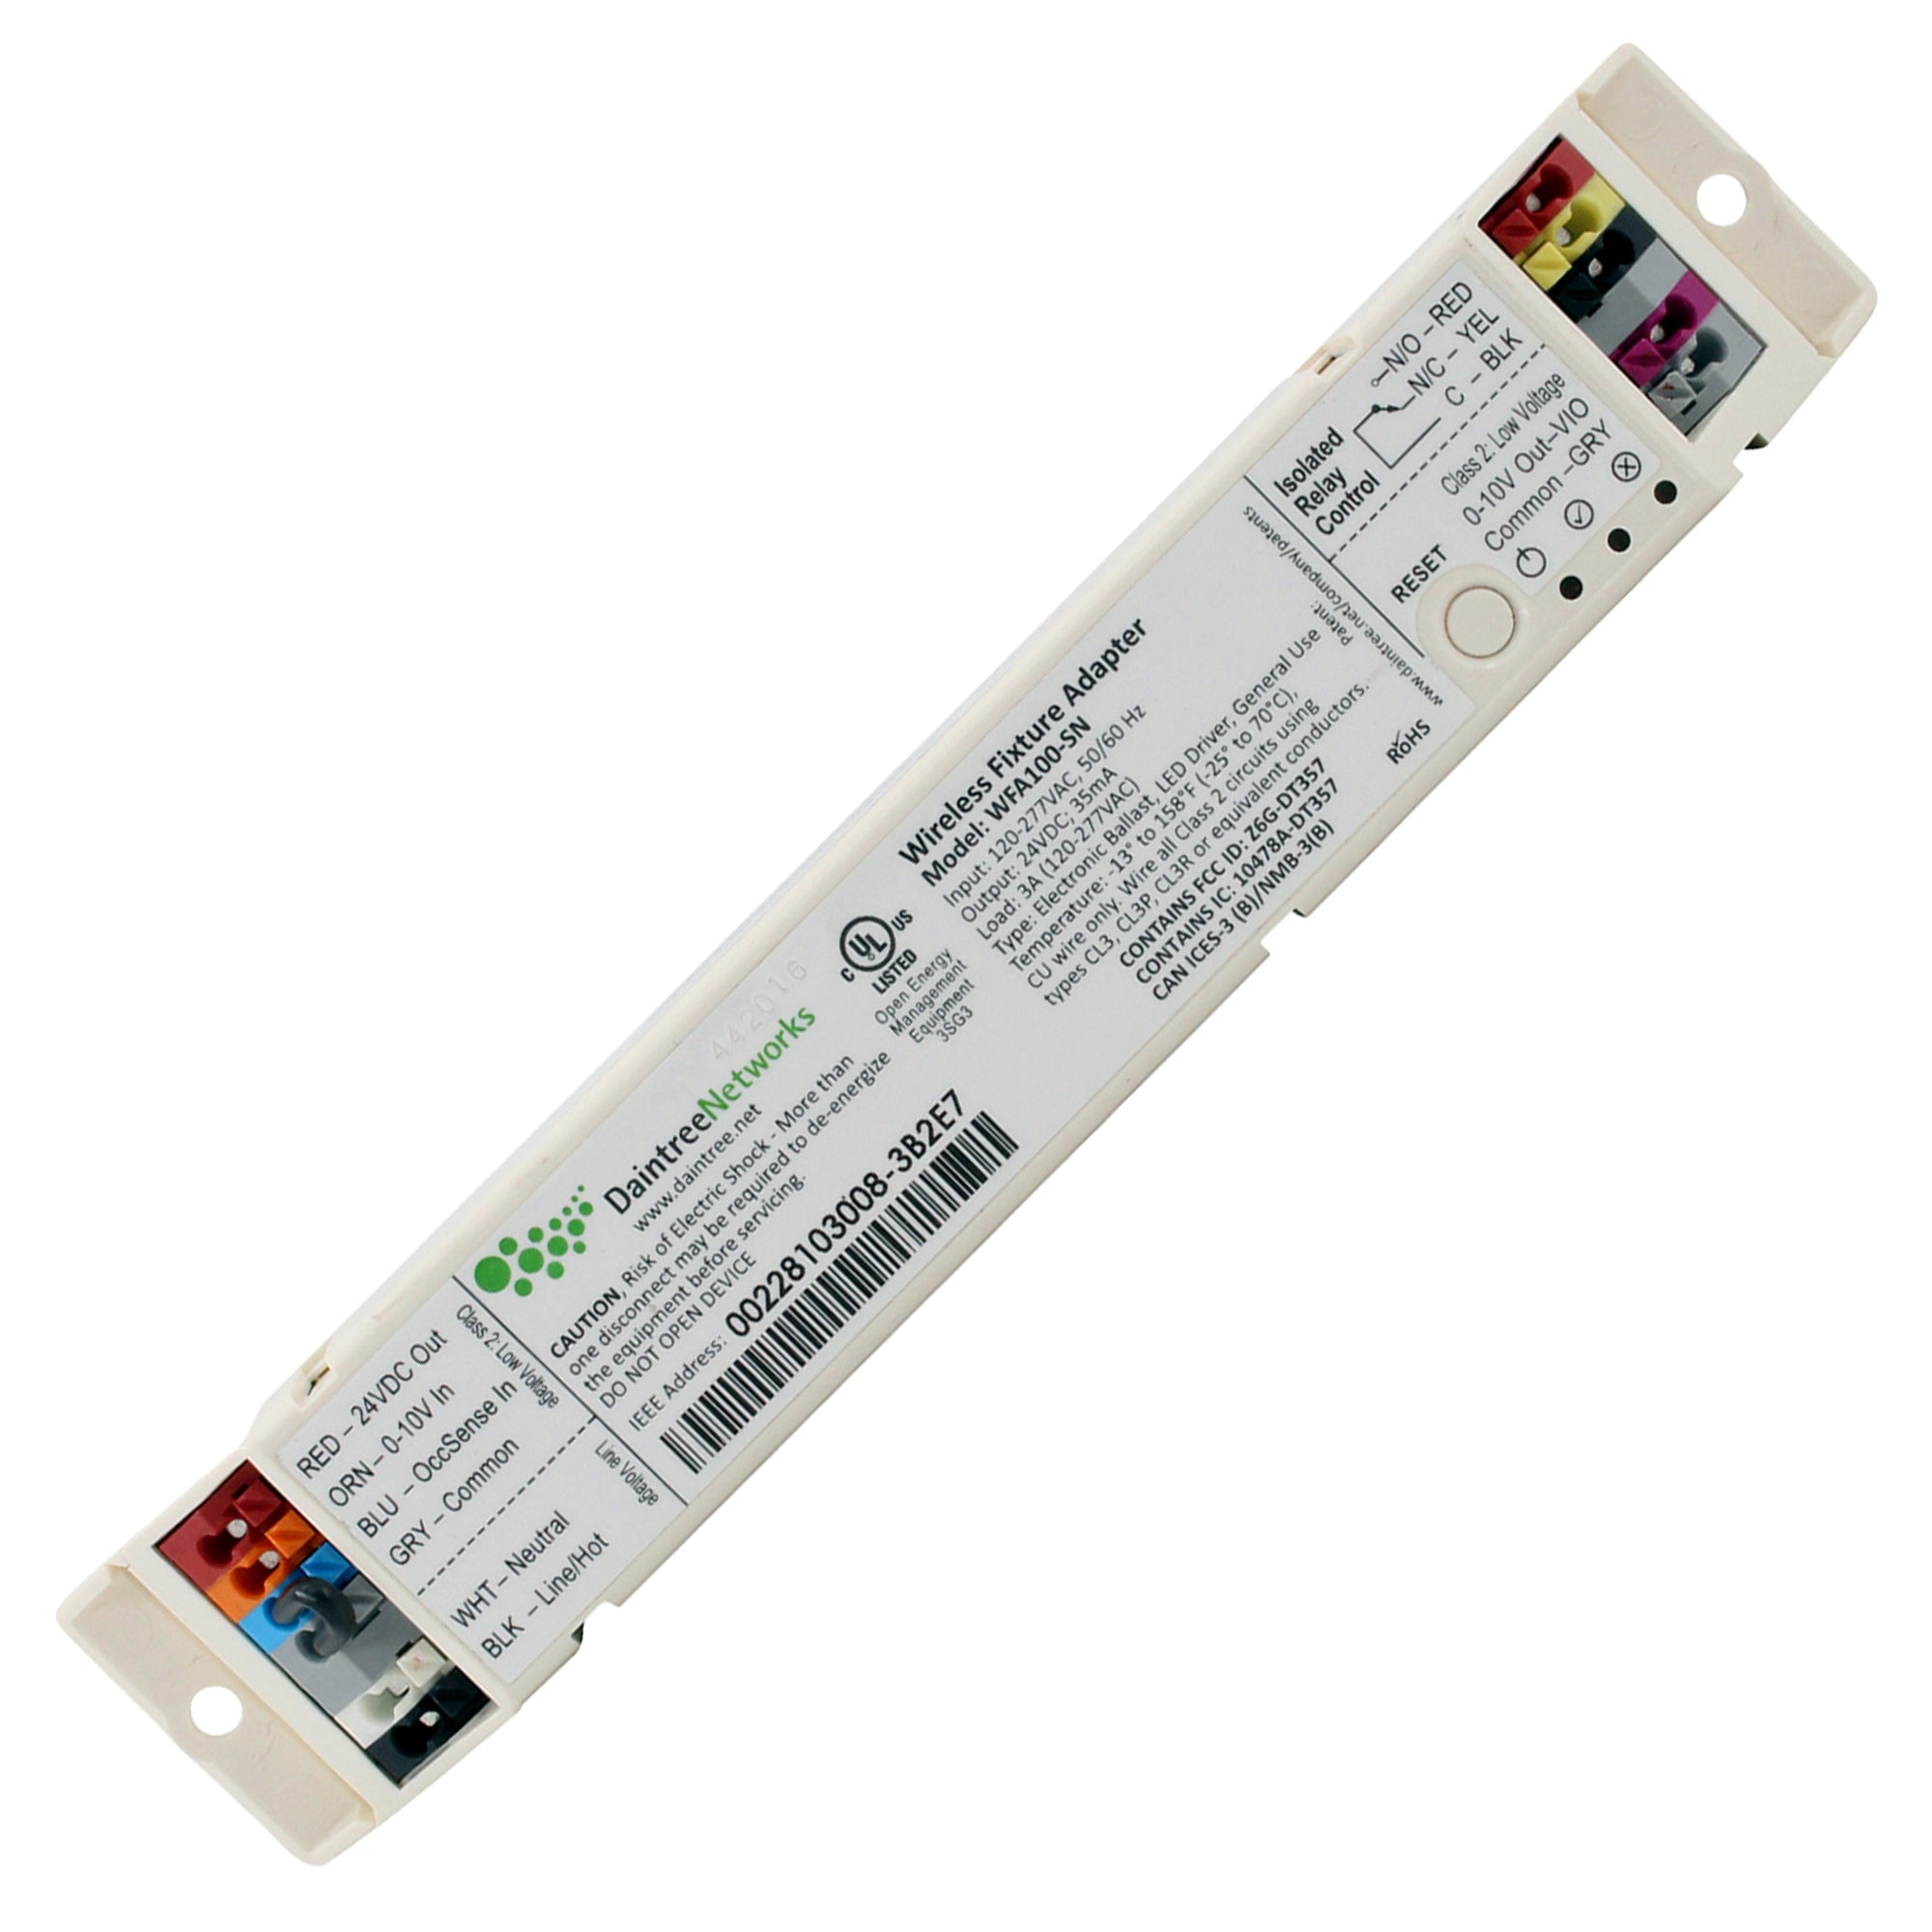 Daintree Networks, DAINTREE WFA100-SN WIRELESS LED DRIVER, 120-277V:IN, 3A 24VDC 35MA OUTPUT